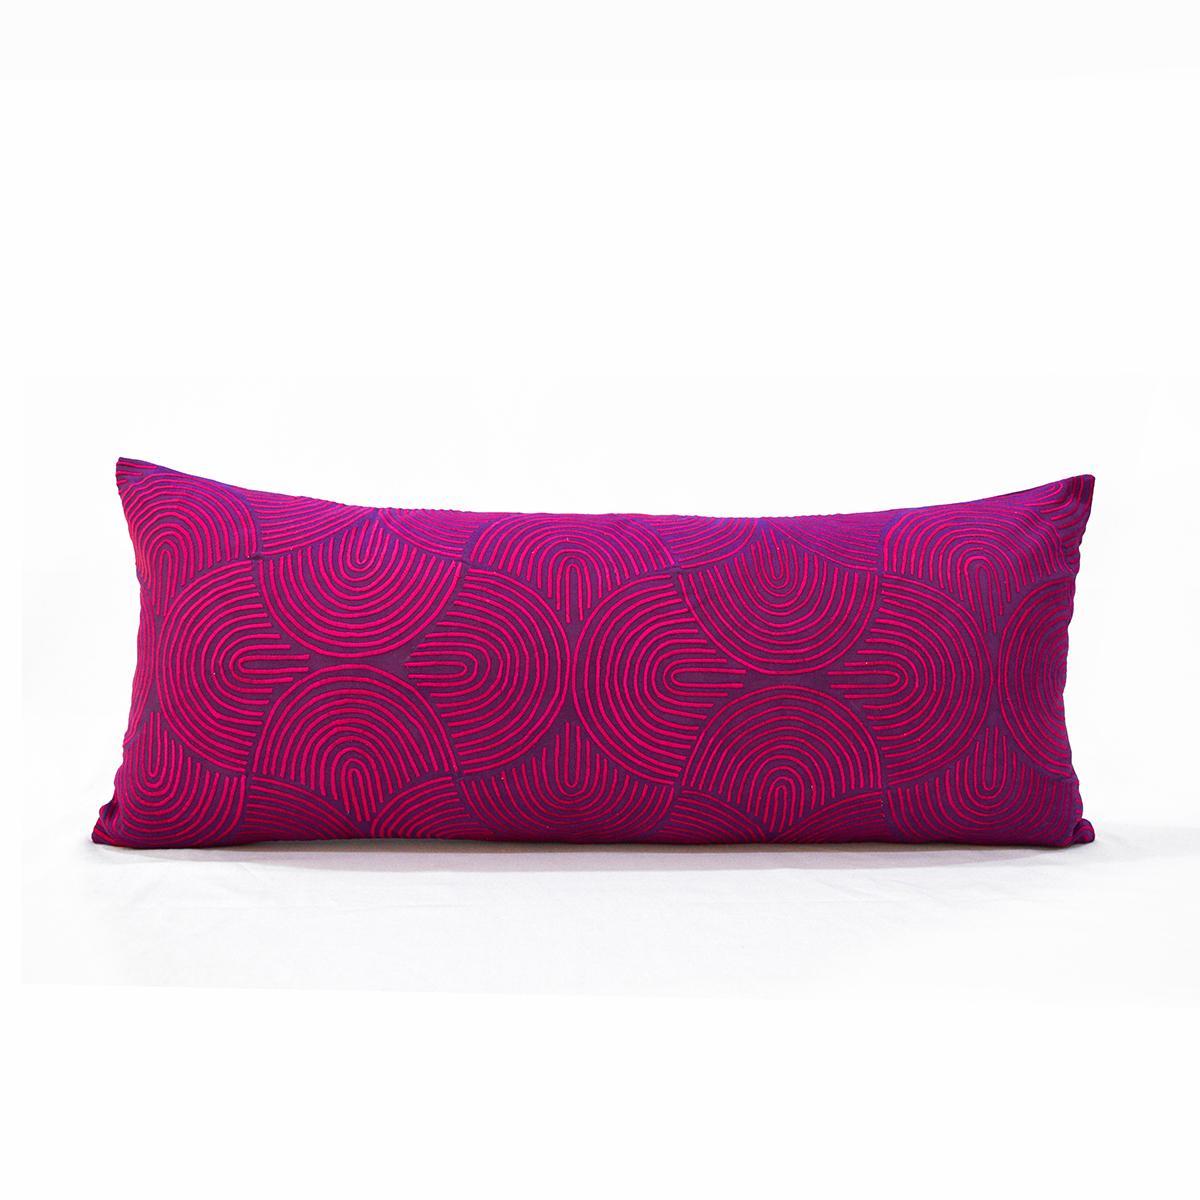 Plum modern retro pattern embroidered cotton pillow cover, long lumbar pillow cover & other sizes available